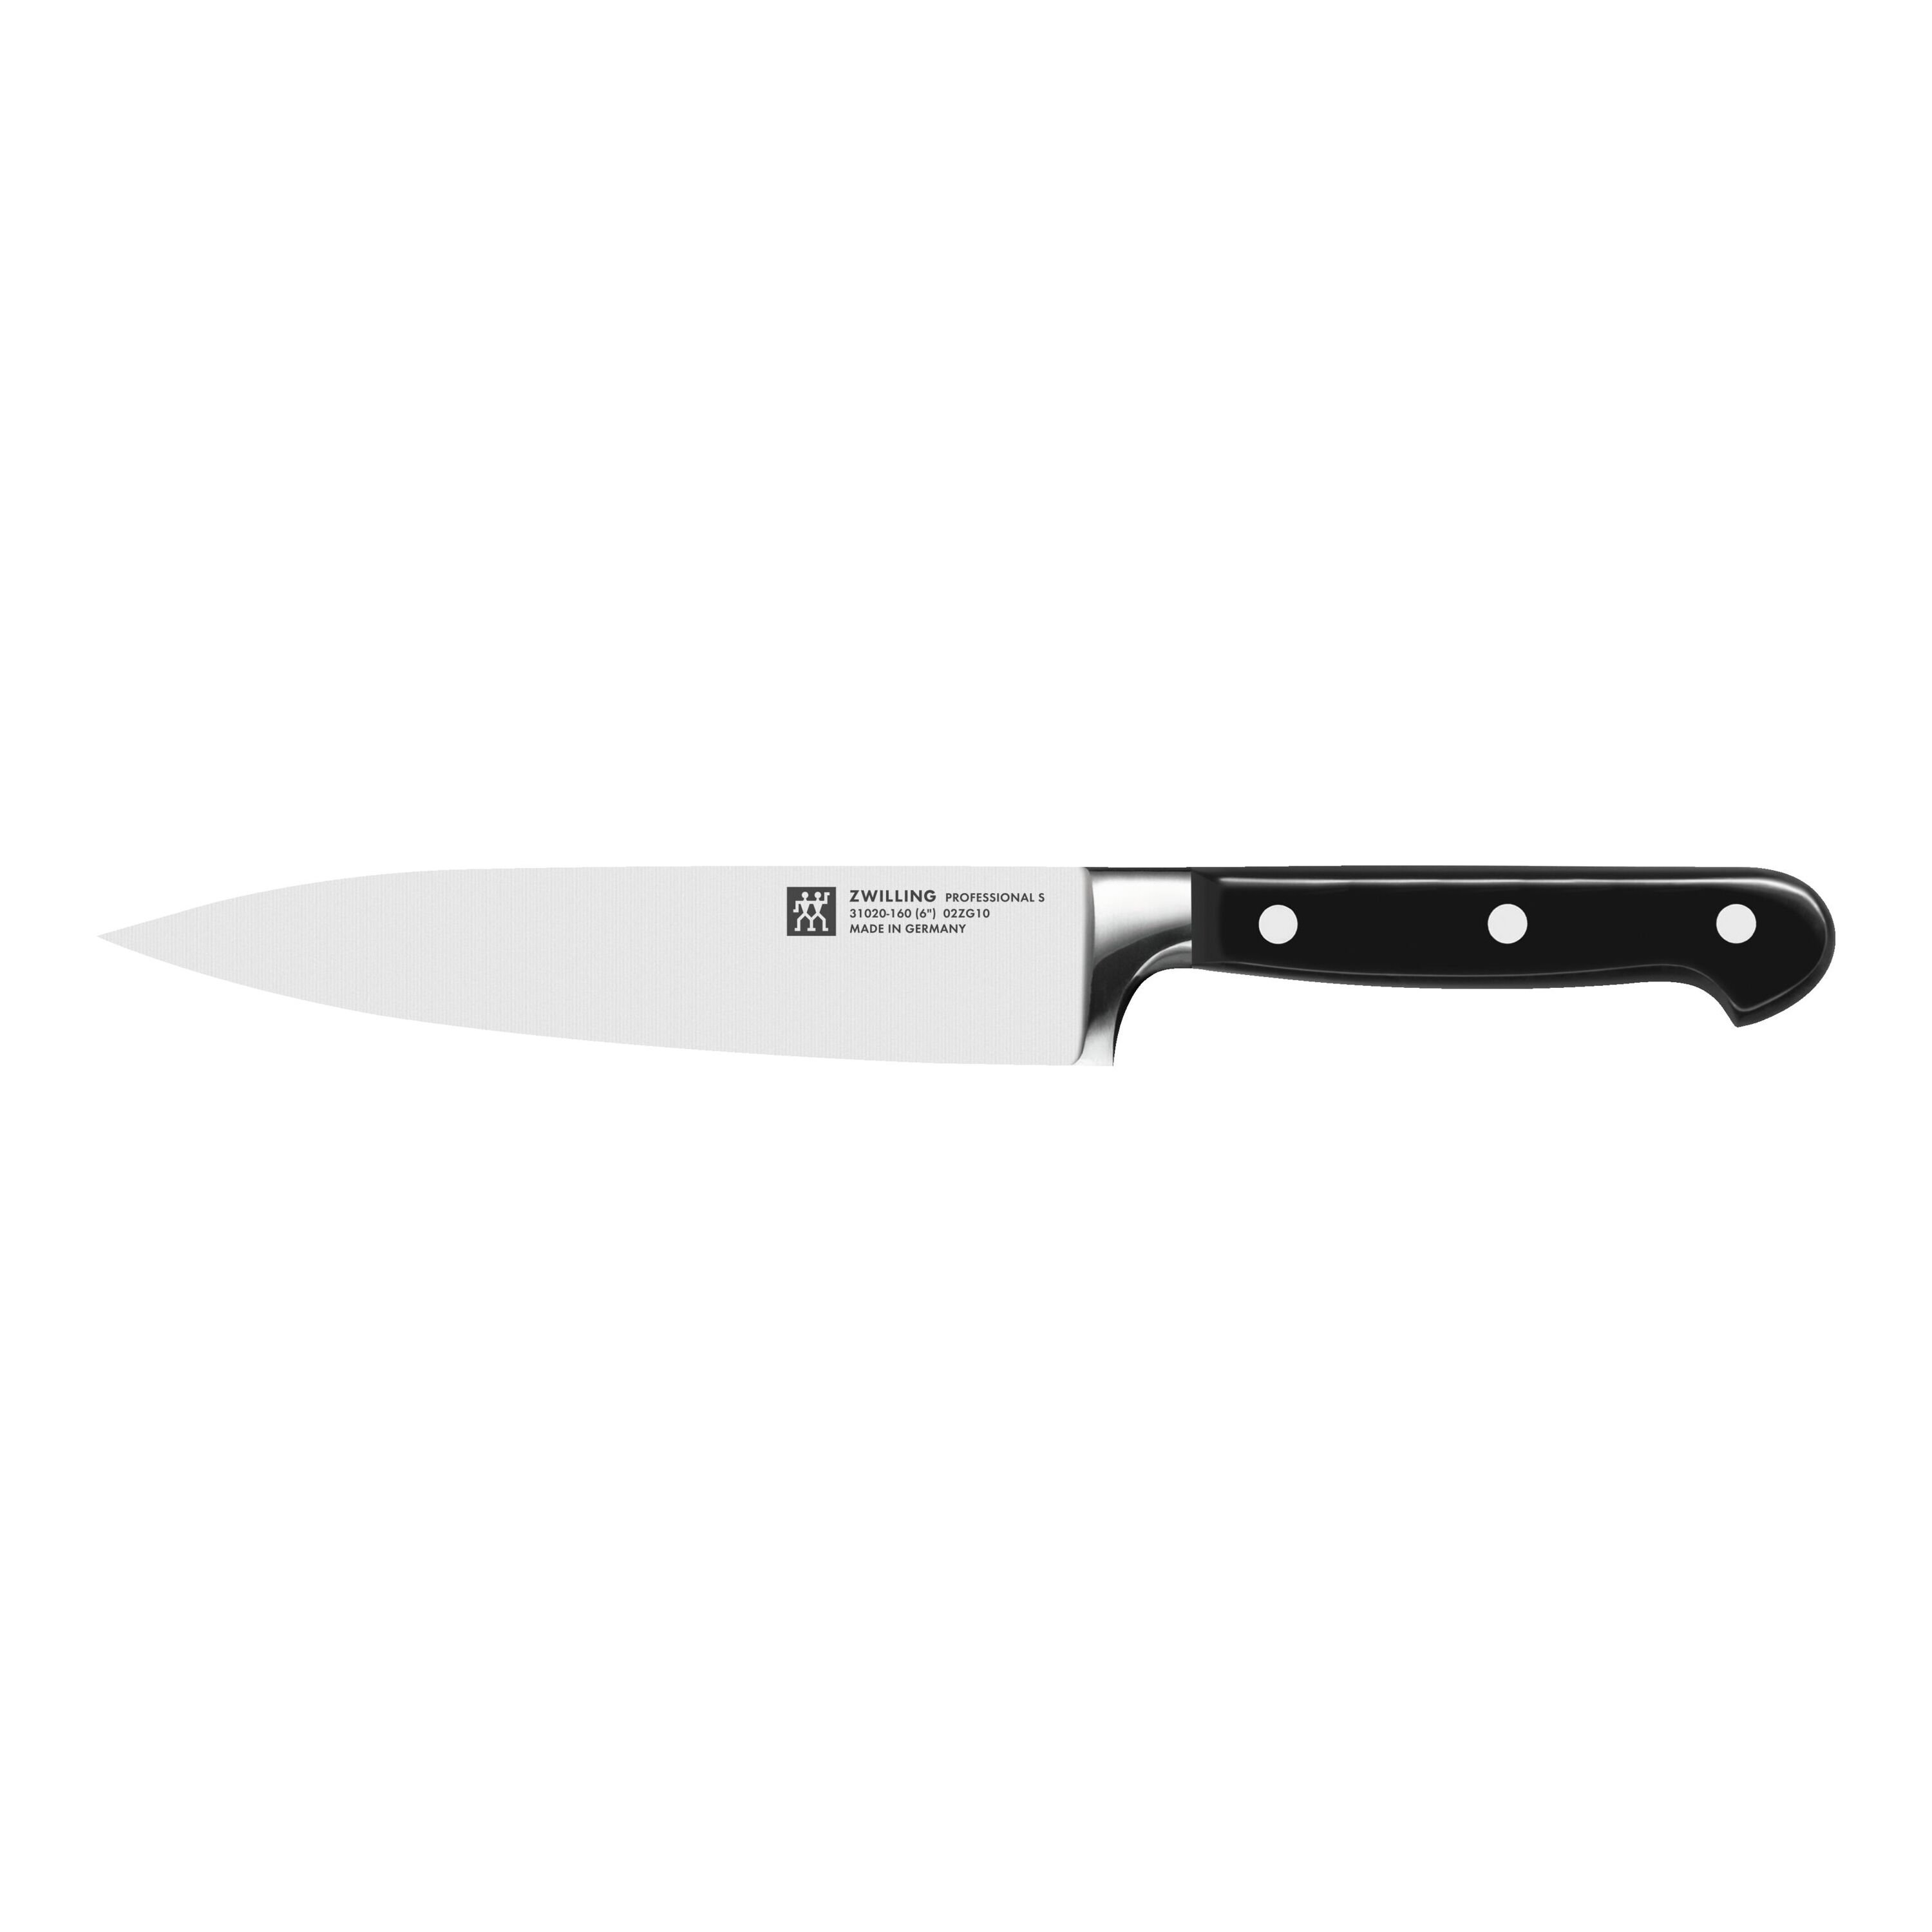 Buy ZWILLING Professional S Knife set | ZWILLING.COM